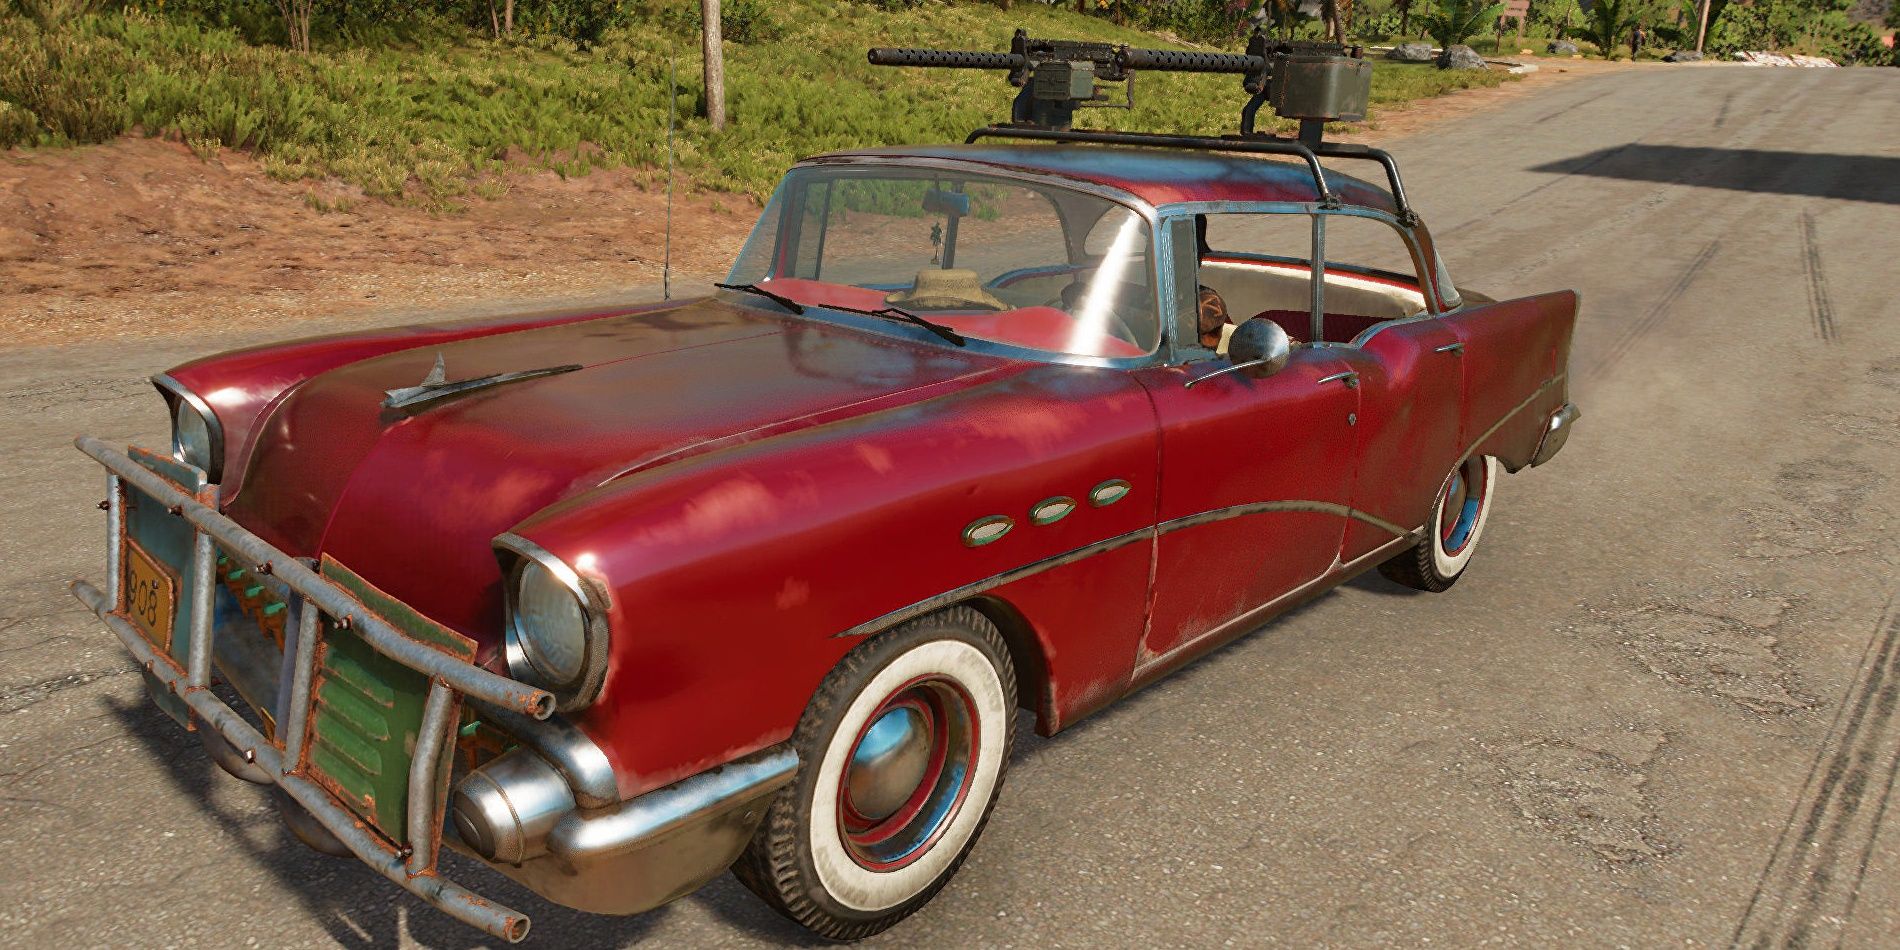 Far Cry 6 upgraded car with turret on roof